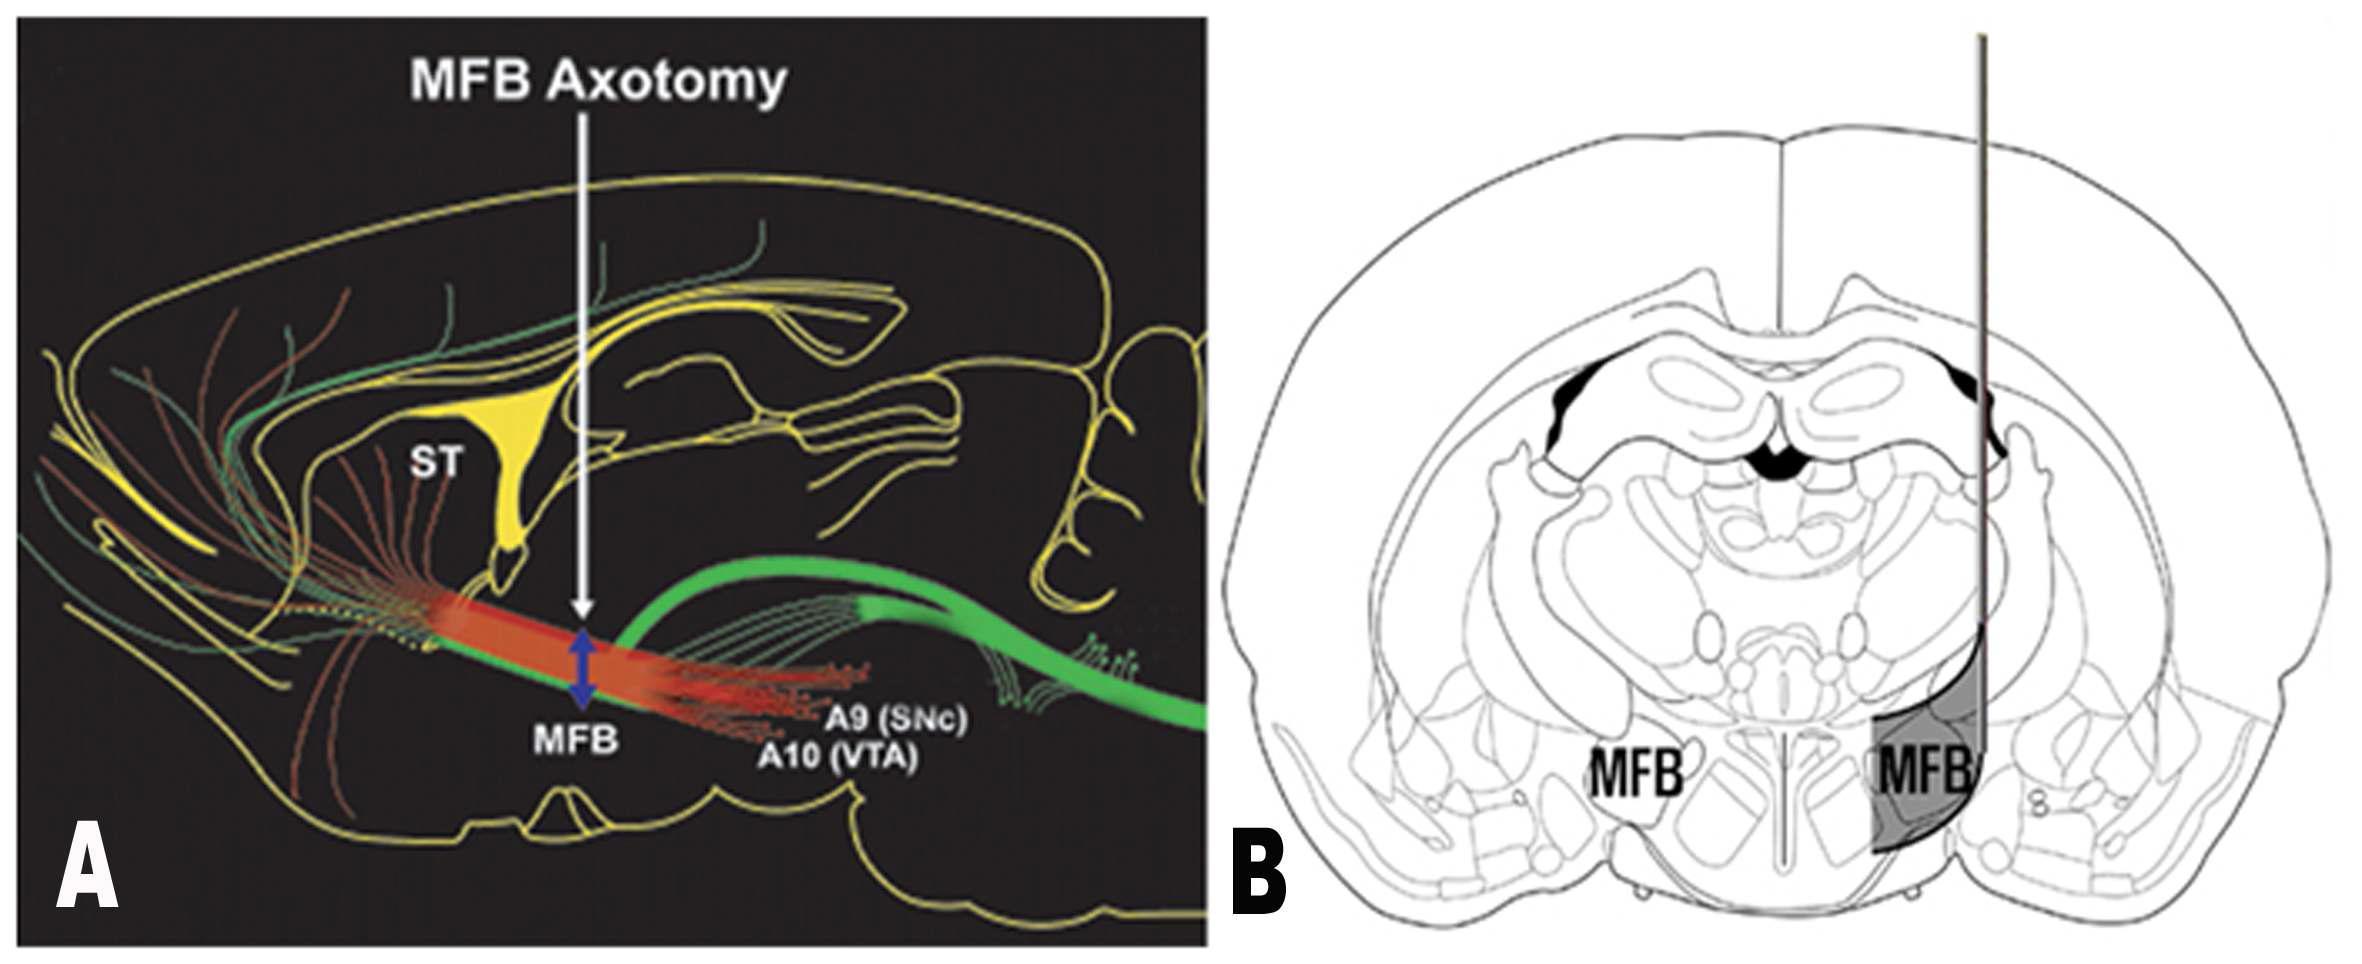 Sagittal (A) and coronal (B) view of the adult rat brain illustrating how the medial forebrain bundle (MFB) transection is conducted.